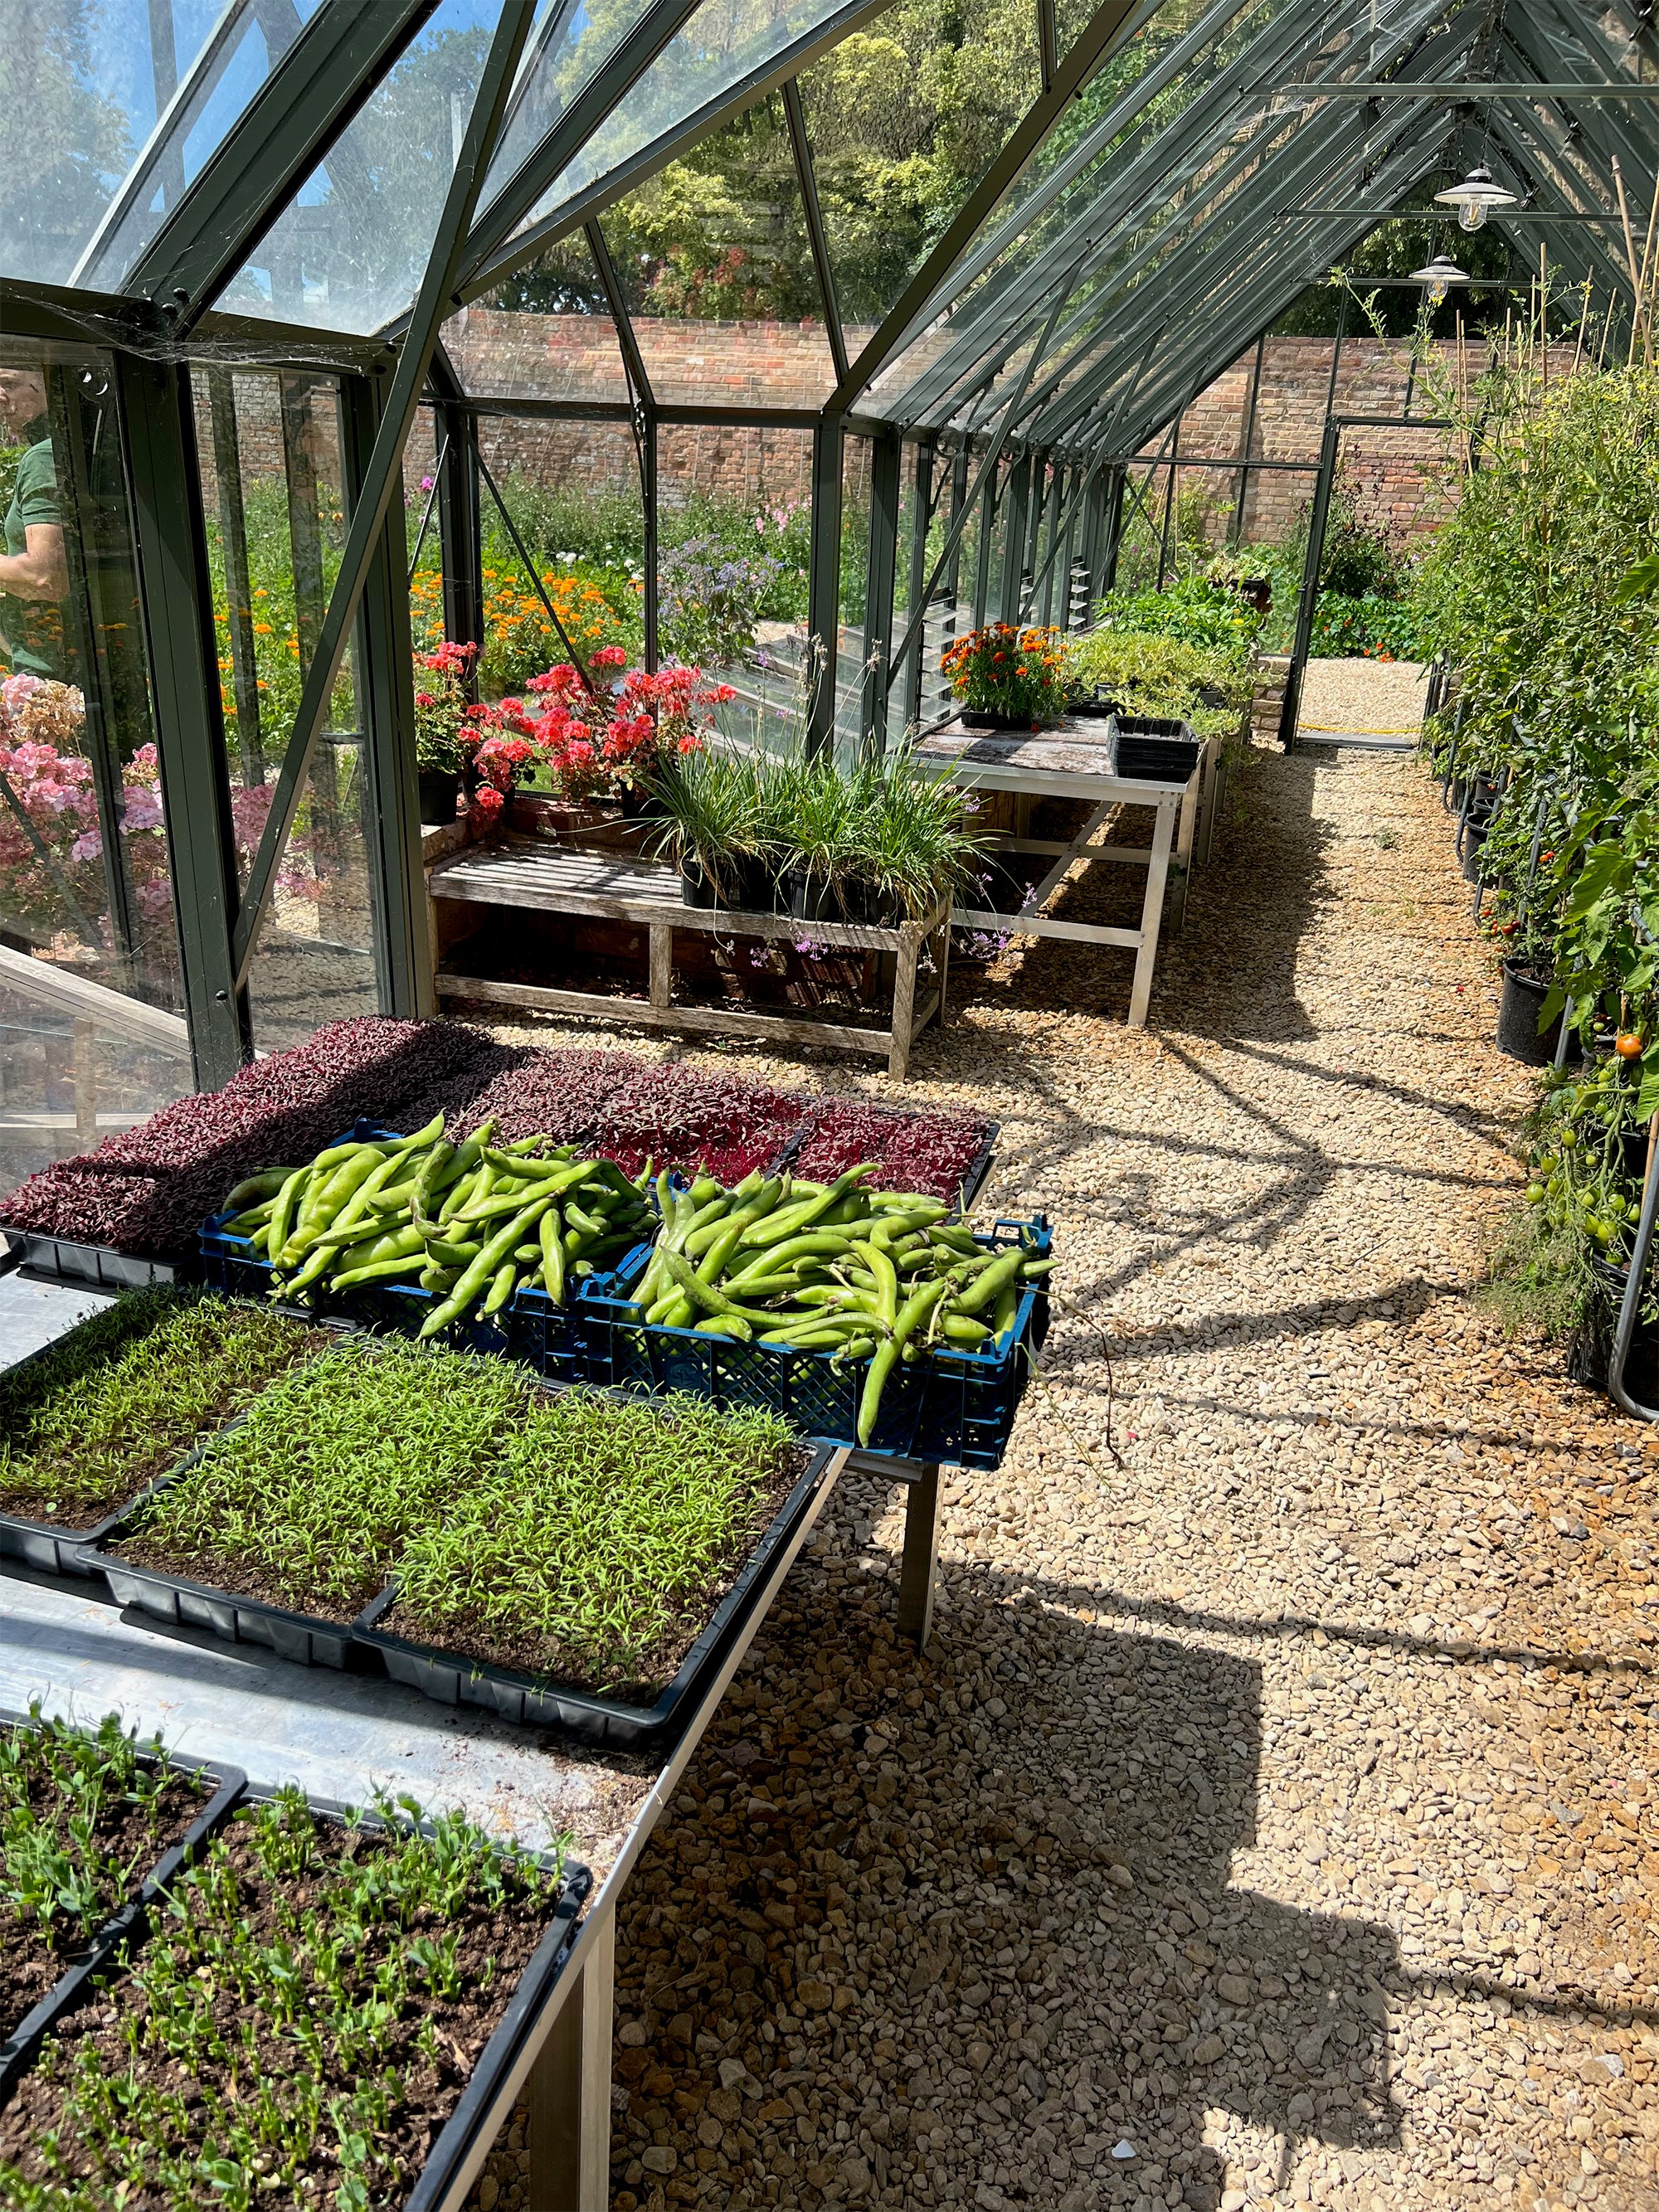 A greenhouse full of seedlings and harvested vegetables, on a sunny day